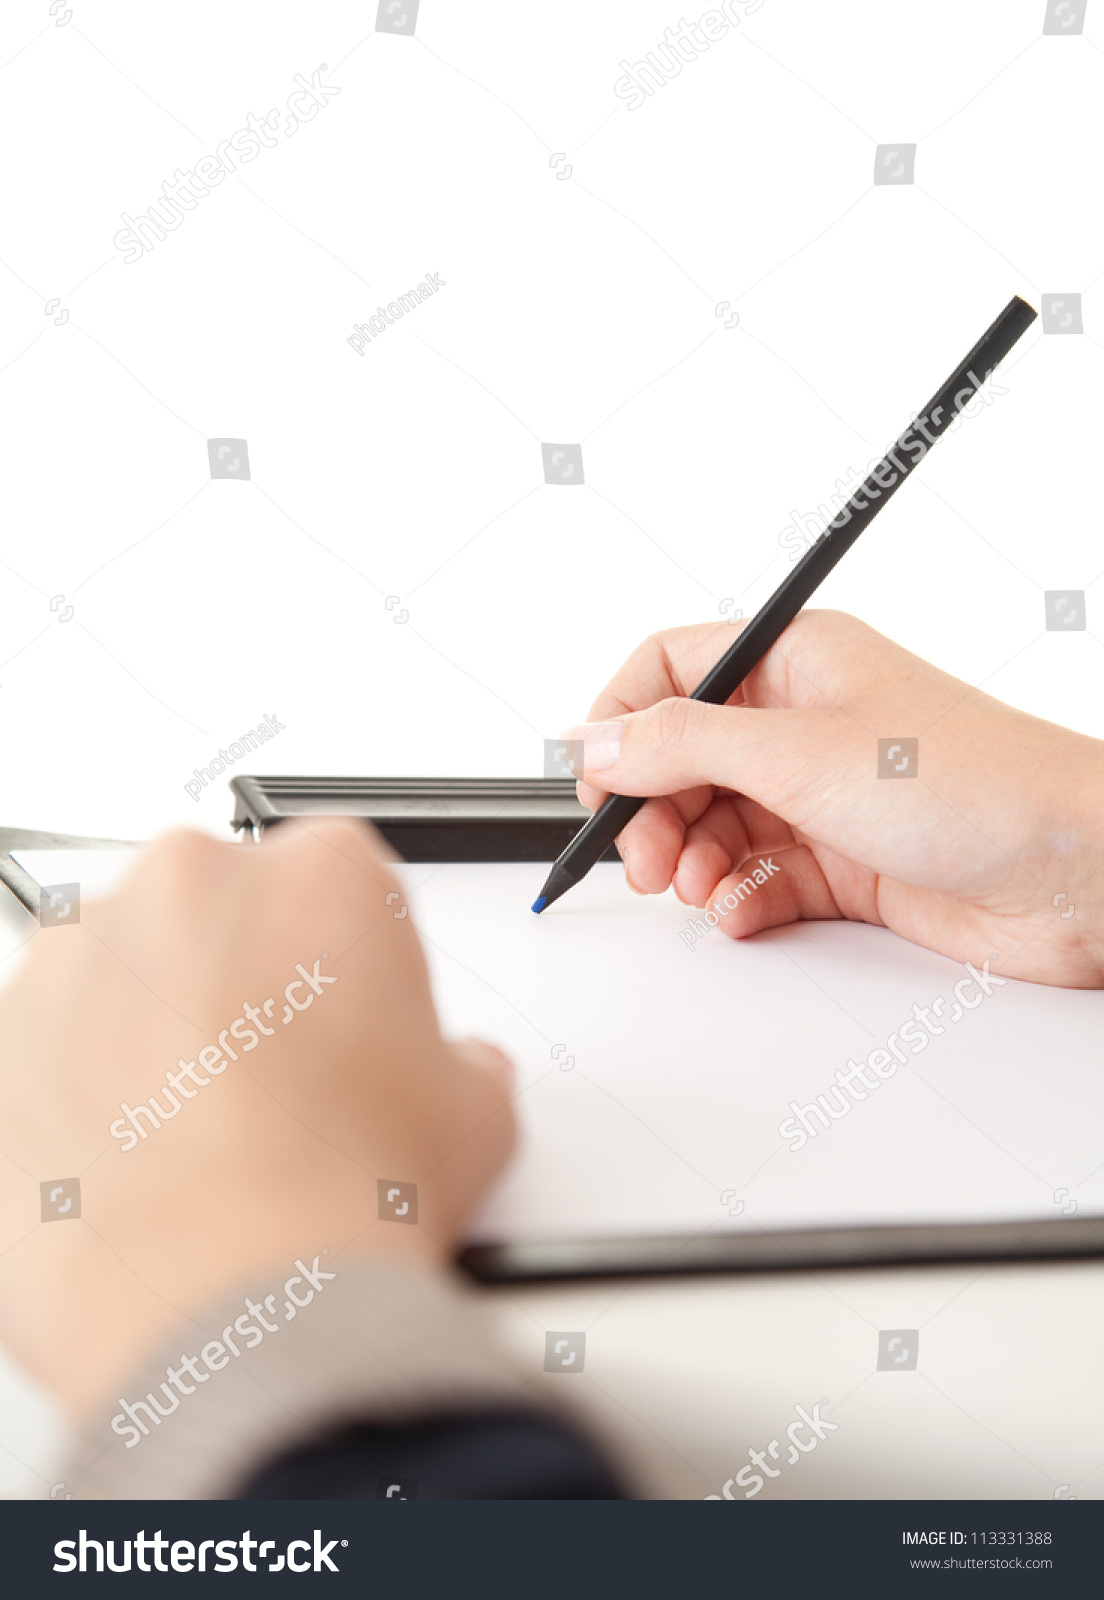 Body Part, Hands Of Writing Woman With Clippboard And Pen, White